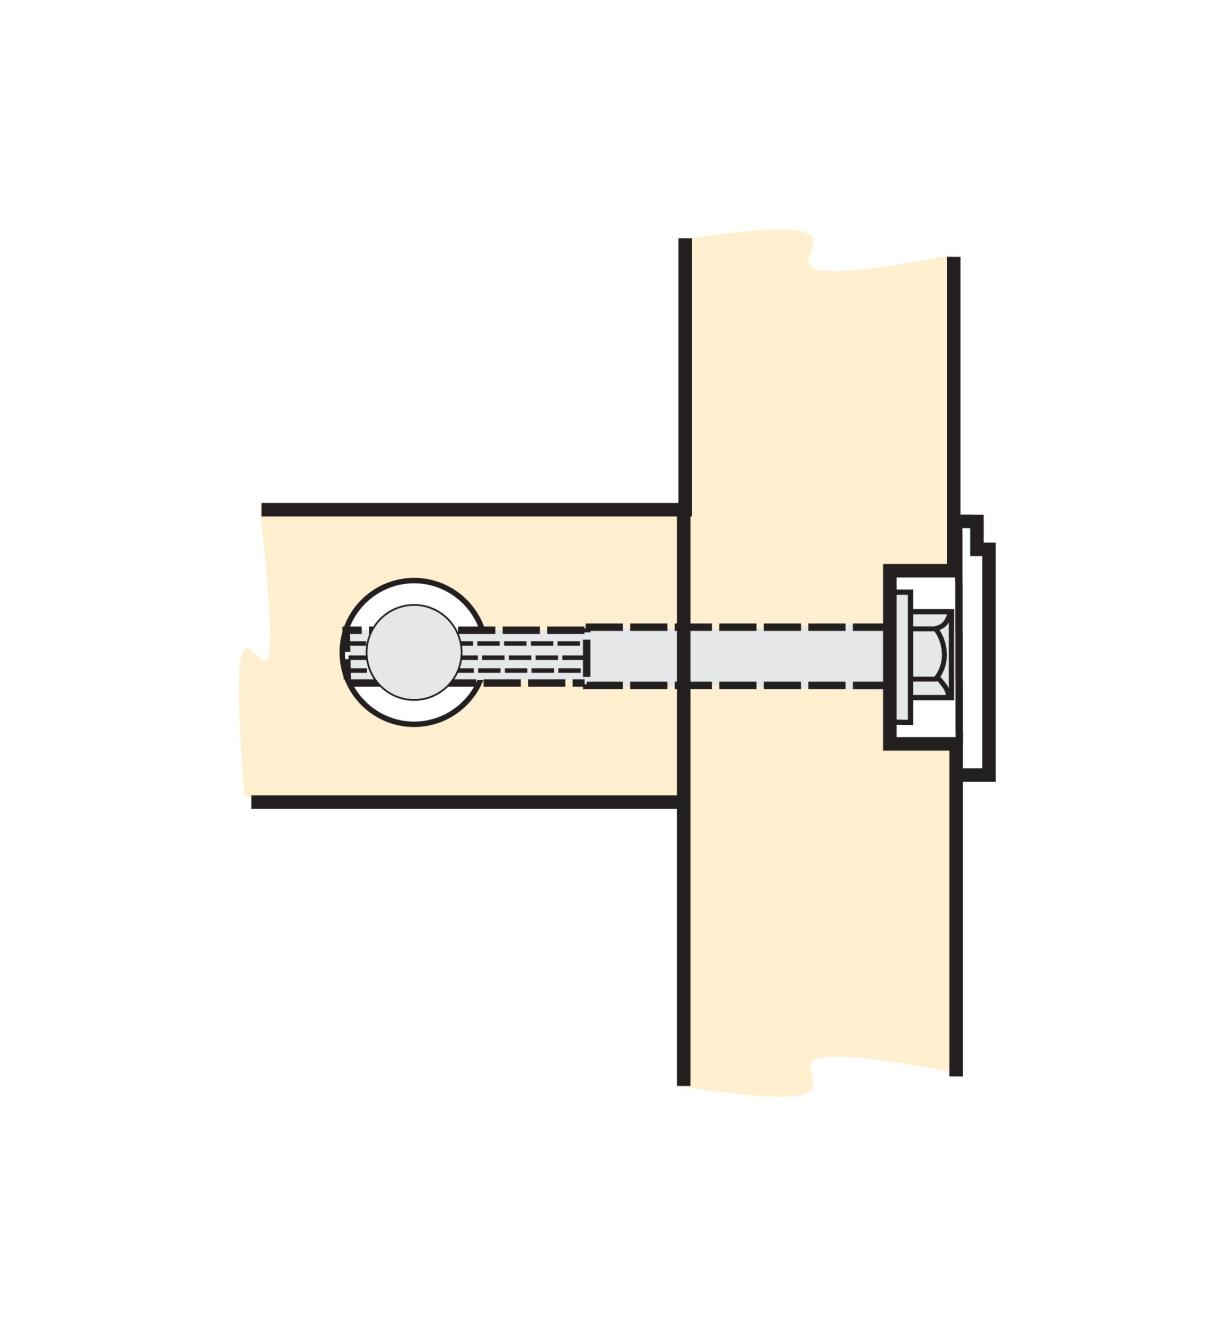 Cutaway illustration of installed bed bolt with cover